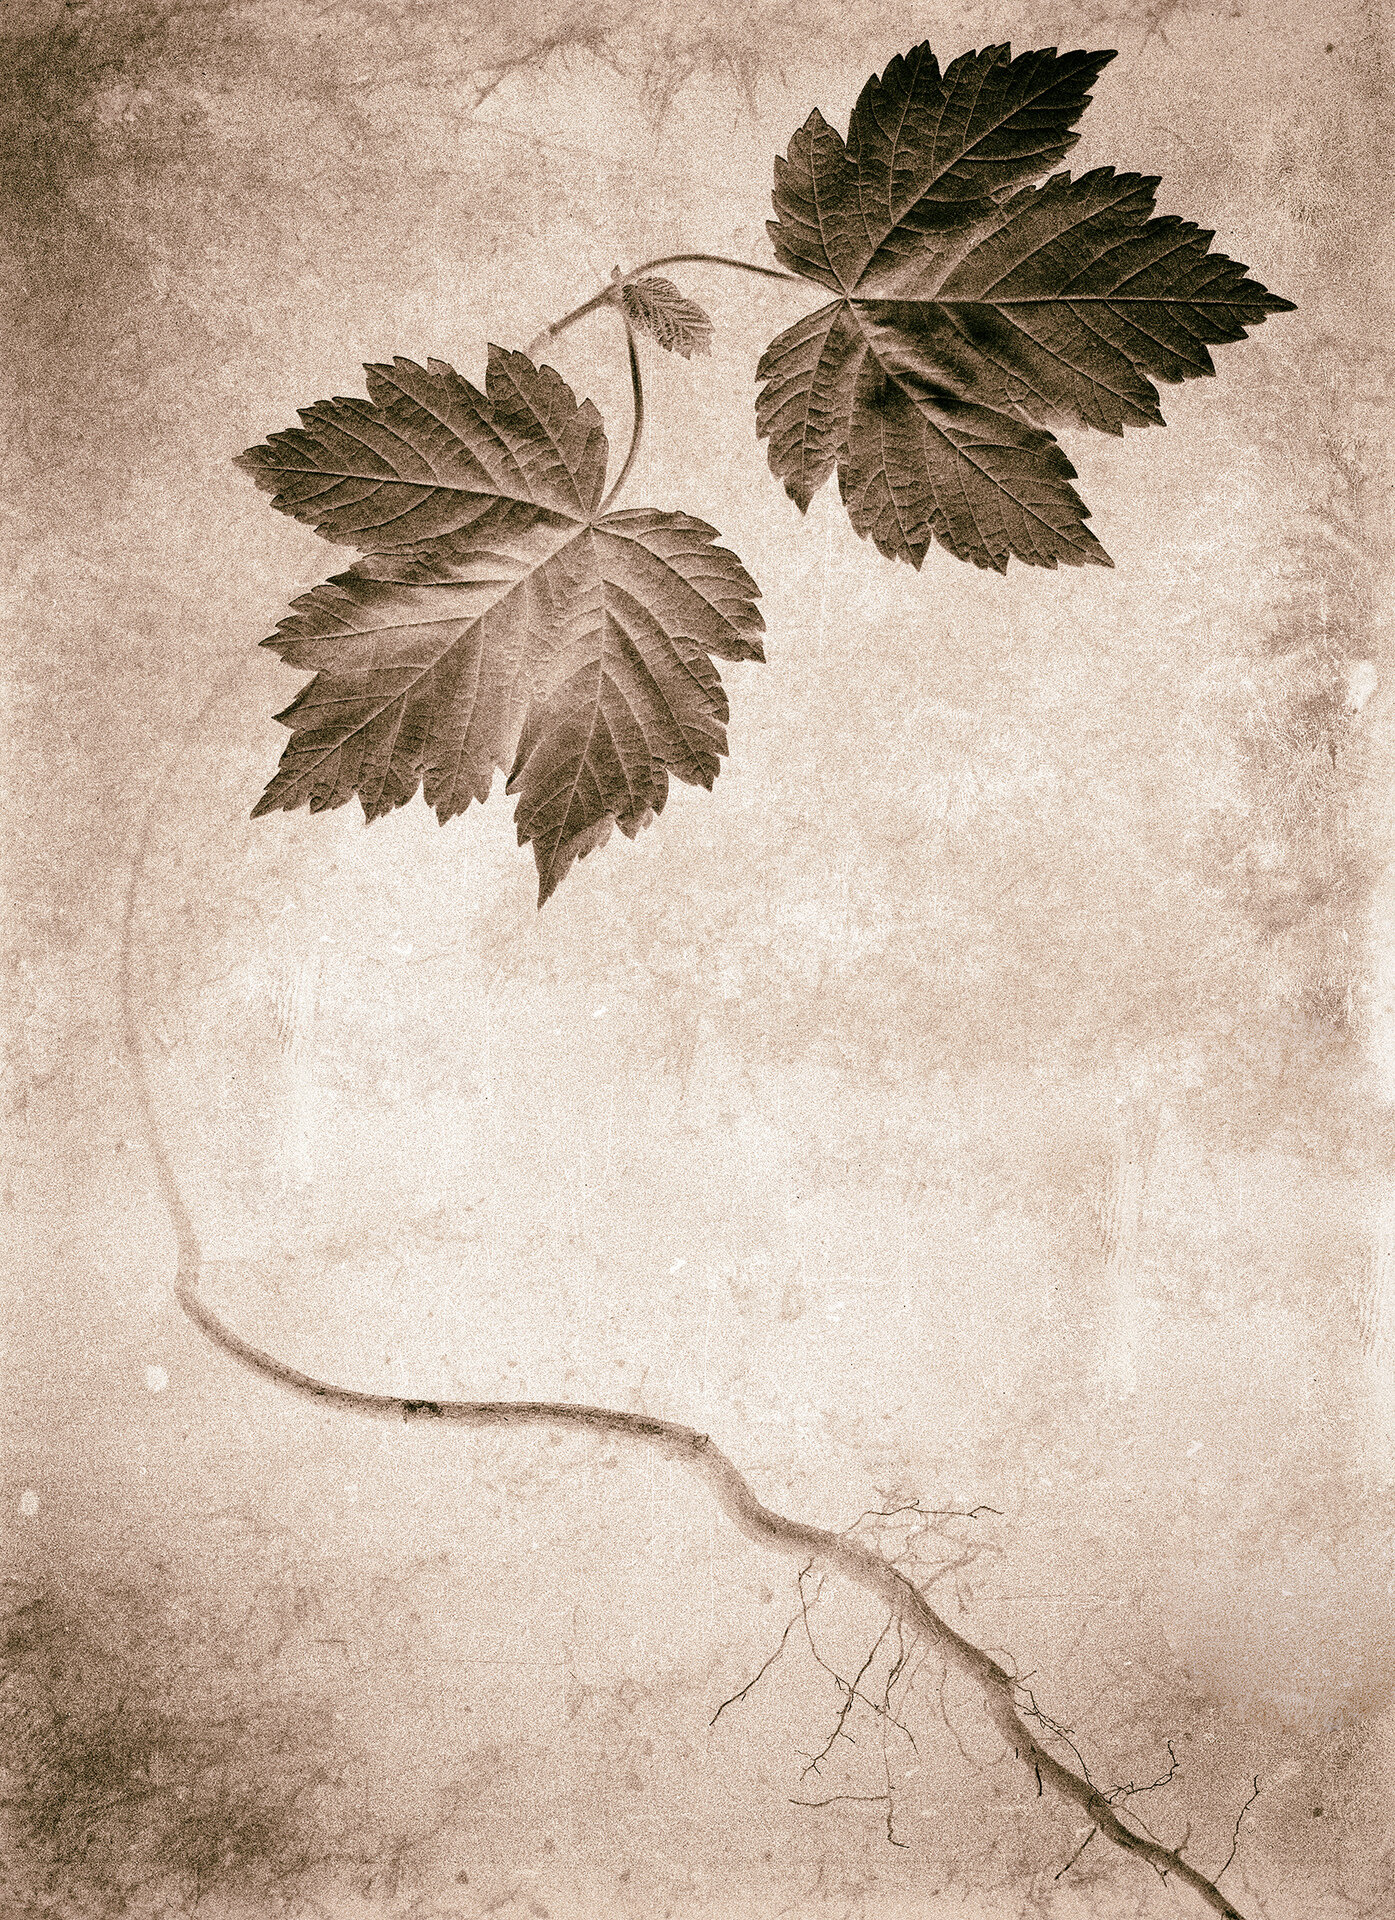   Maple Shoot and Root , 2020  Archival pigment print  20" x 14.5" 